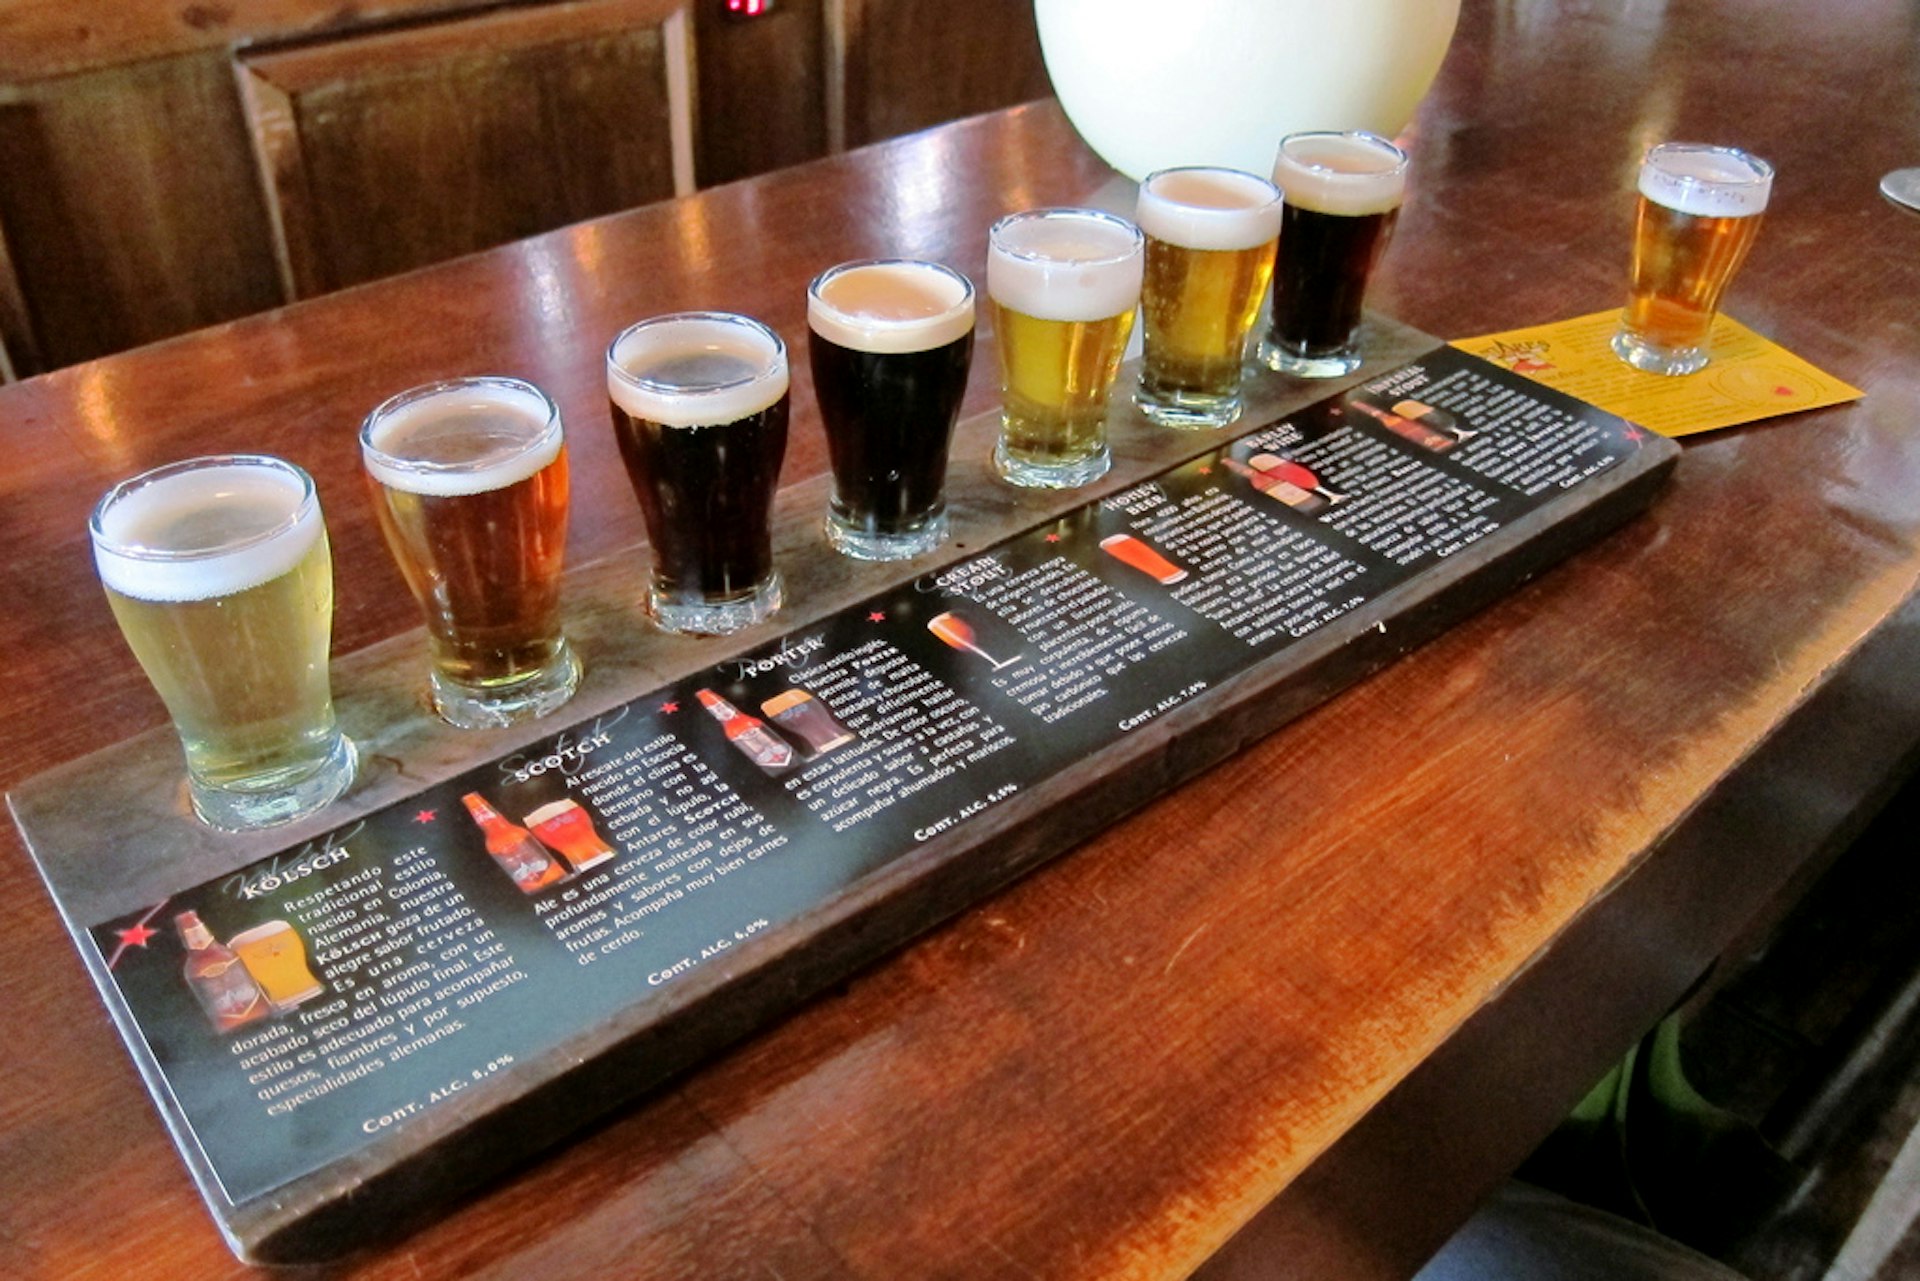 Flight of beer at Antares brewery in Bariloche. Image by fabulousfabs / CC BY 2.0